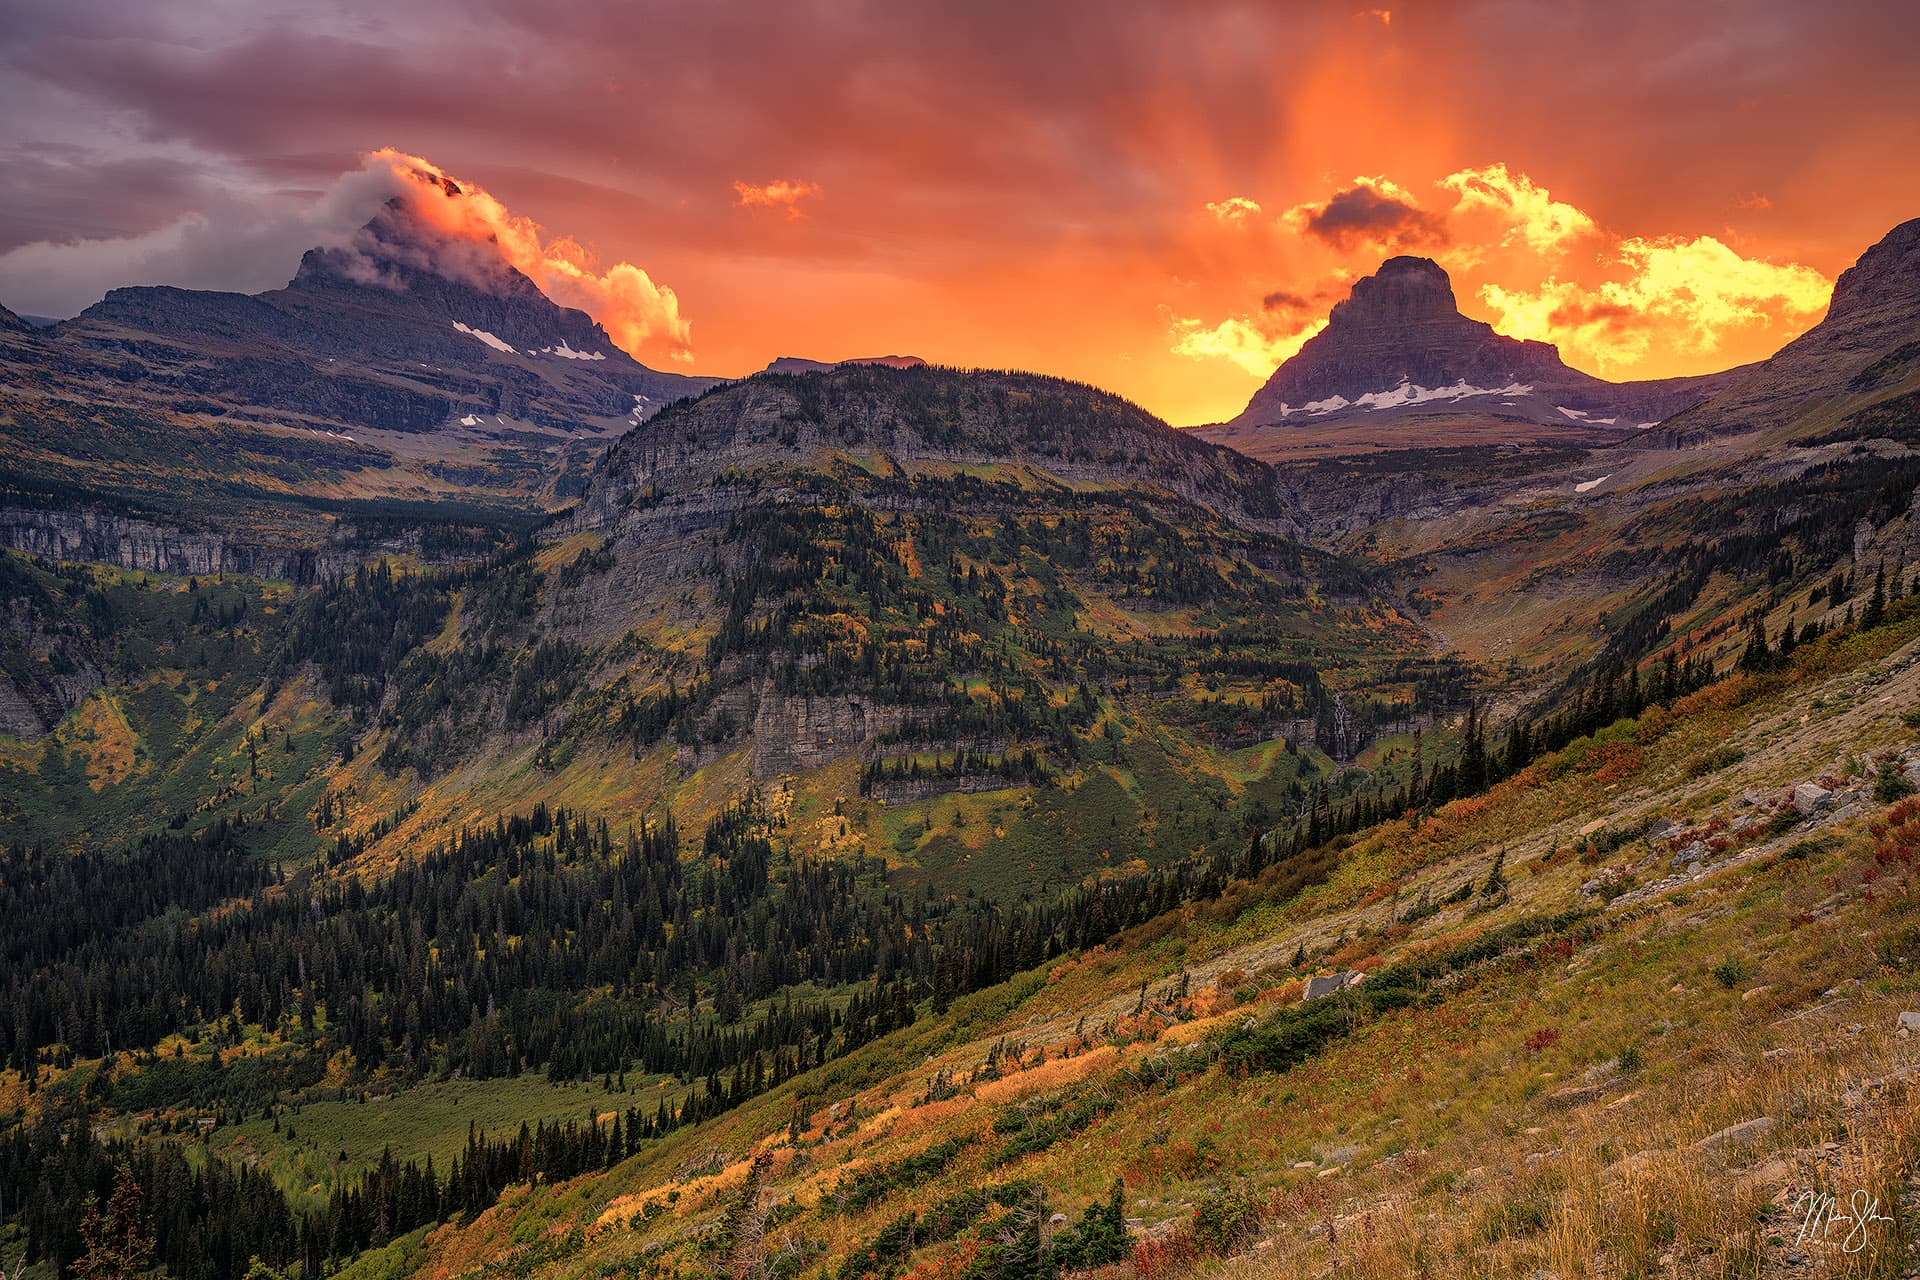 Montana Photography: Sunset over Going-to-the-Sun road in Glacier National Park